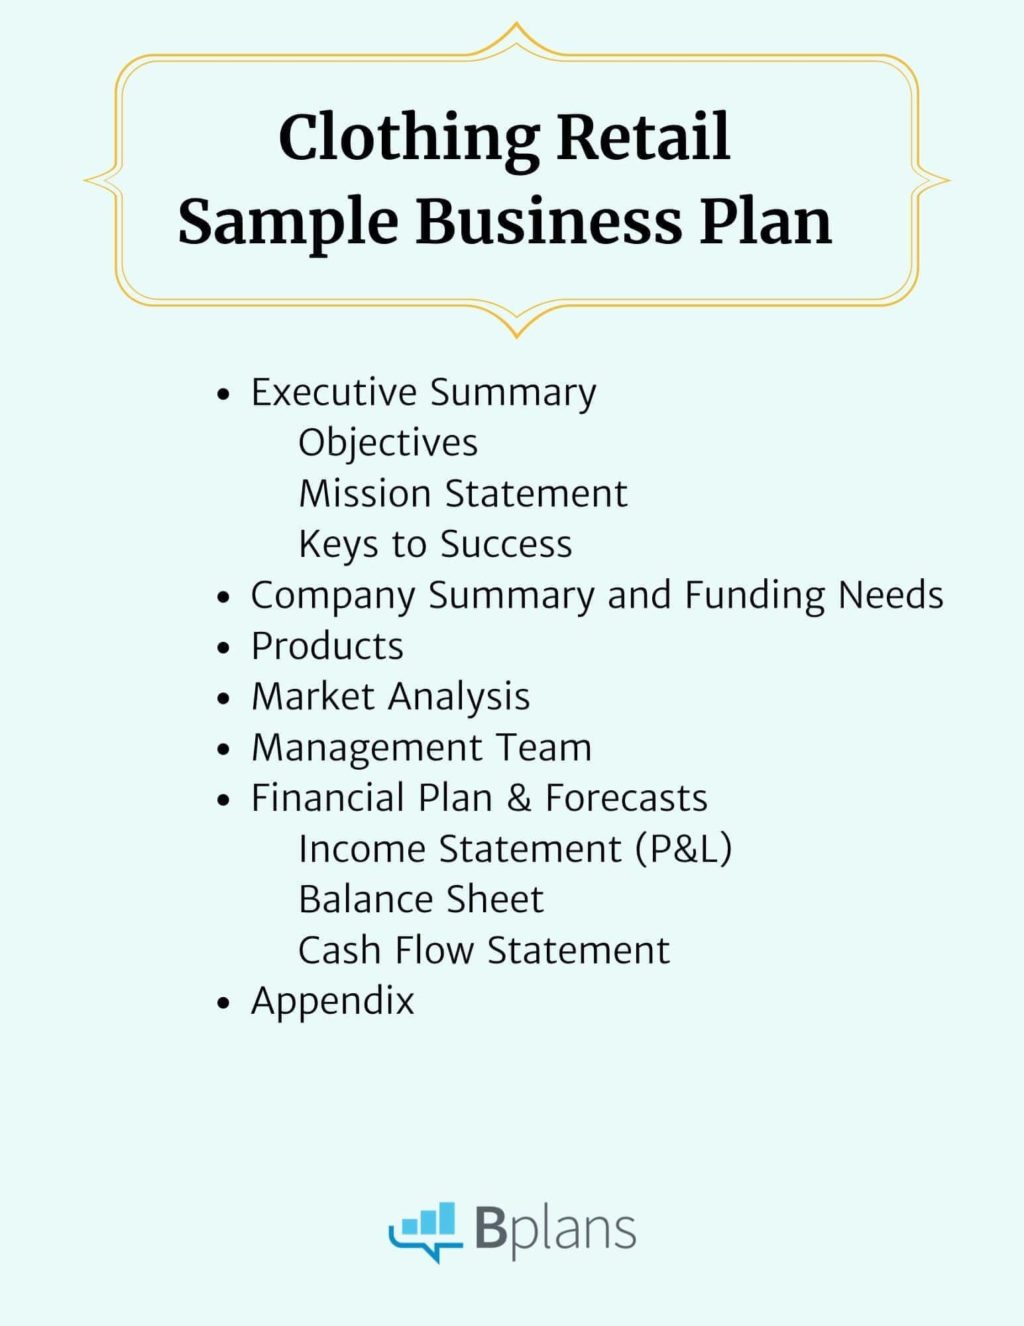 Clothing E-Commerce Site Business Plan Example 